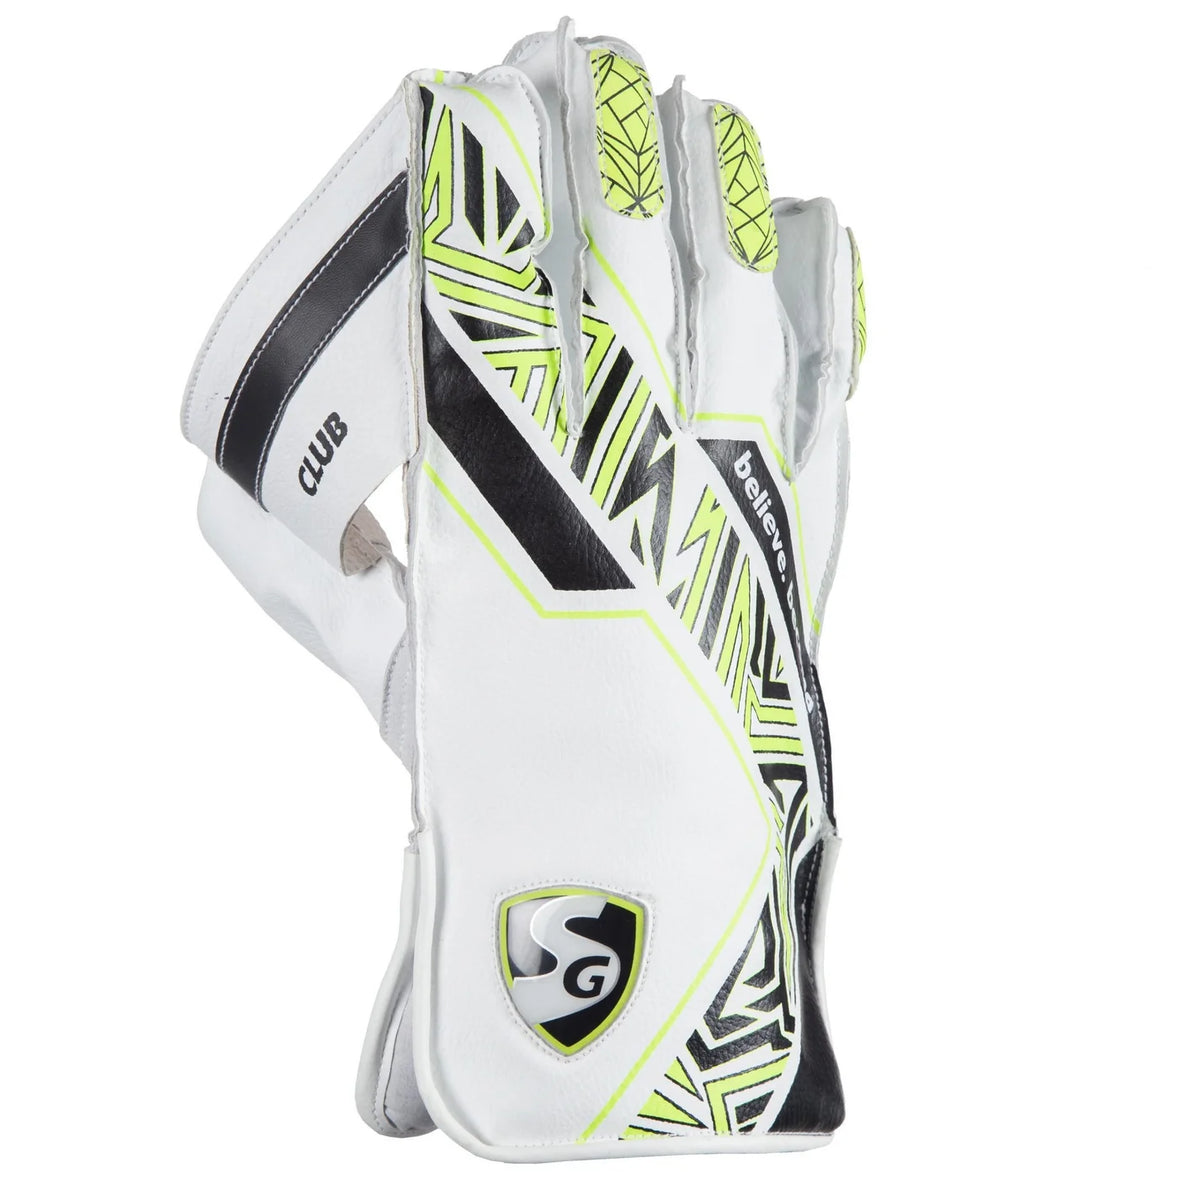 Pre-Order SG Club Wicket Keeping Gloves (Multi-Color) W.K. Gloves